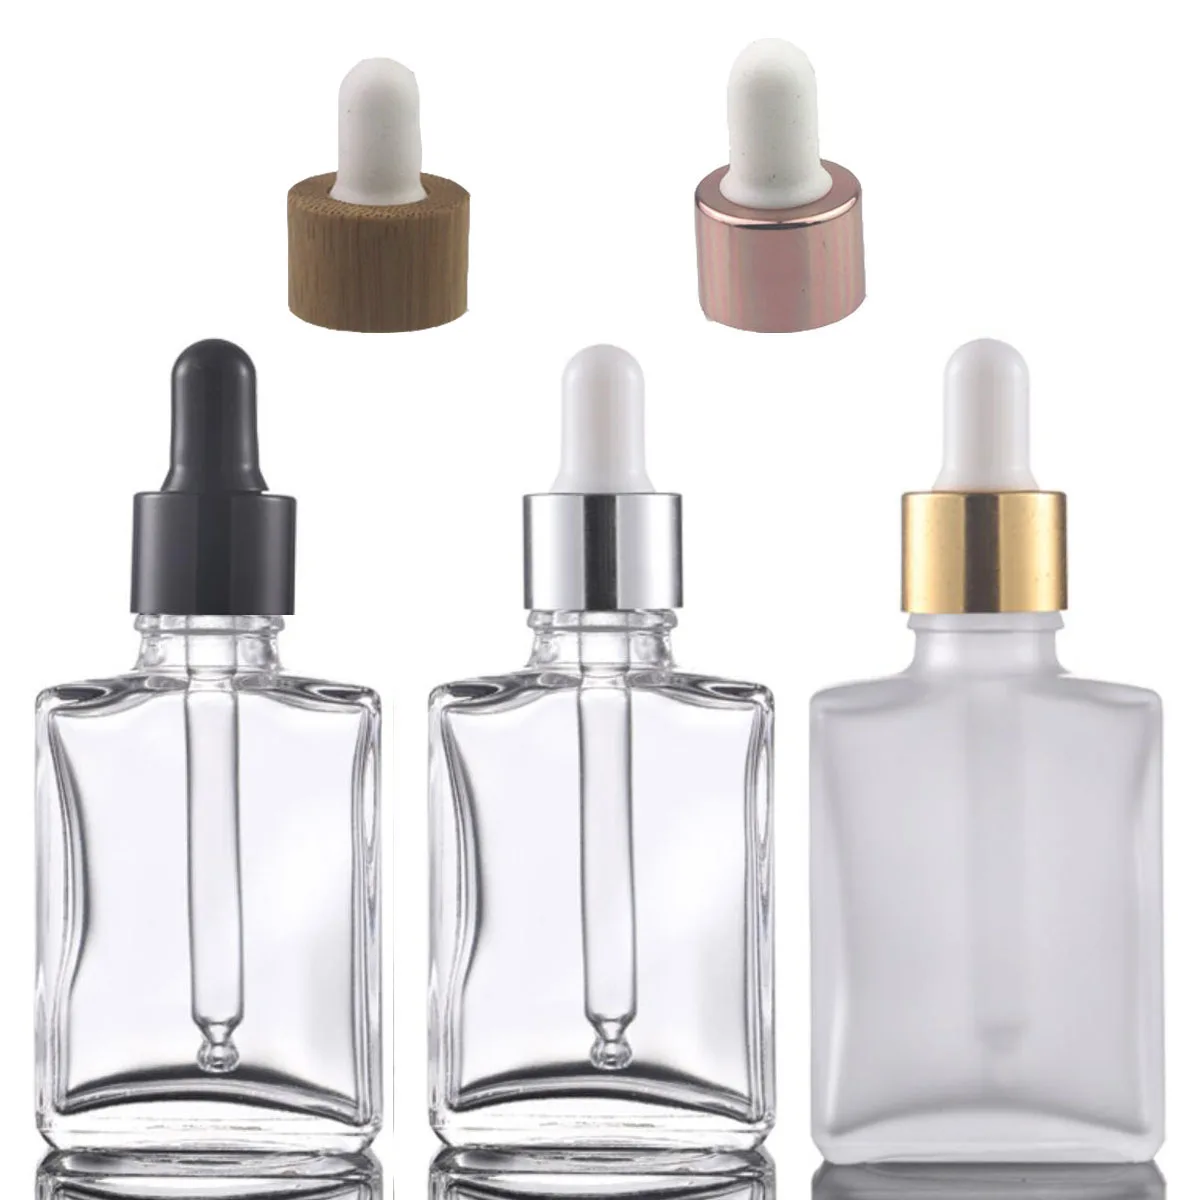 10X 15ml 30ml 50ml 100m Flat Frosted Matte Clear Black Glass Essential Oils Serum Bottle With Glass Dropper Eye dripper Pipette